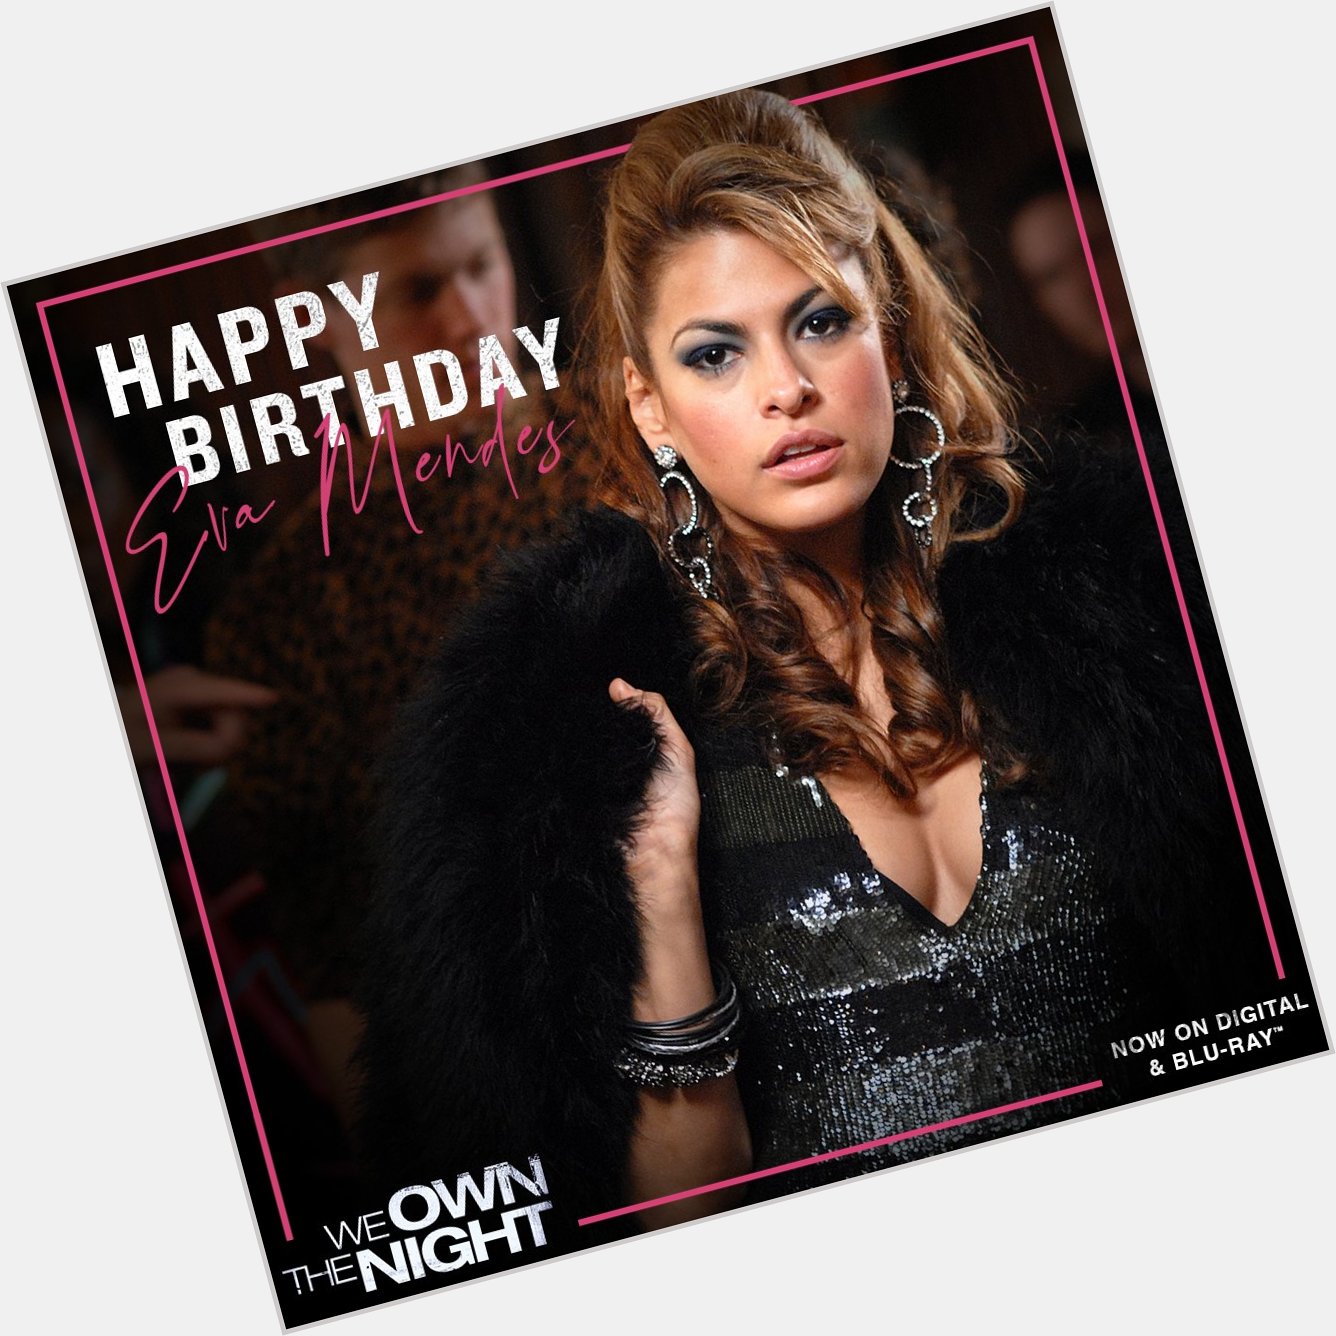 Happy Birthday Eva Mendes here s to you owning the night!  